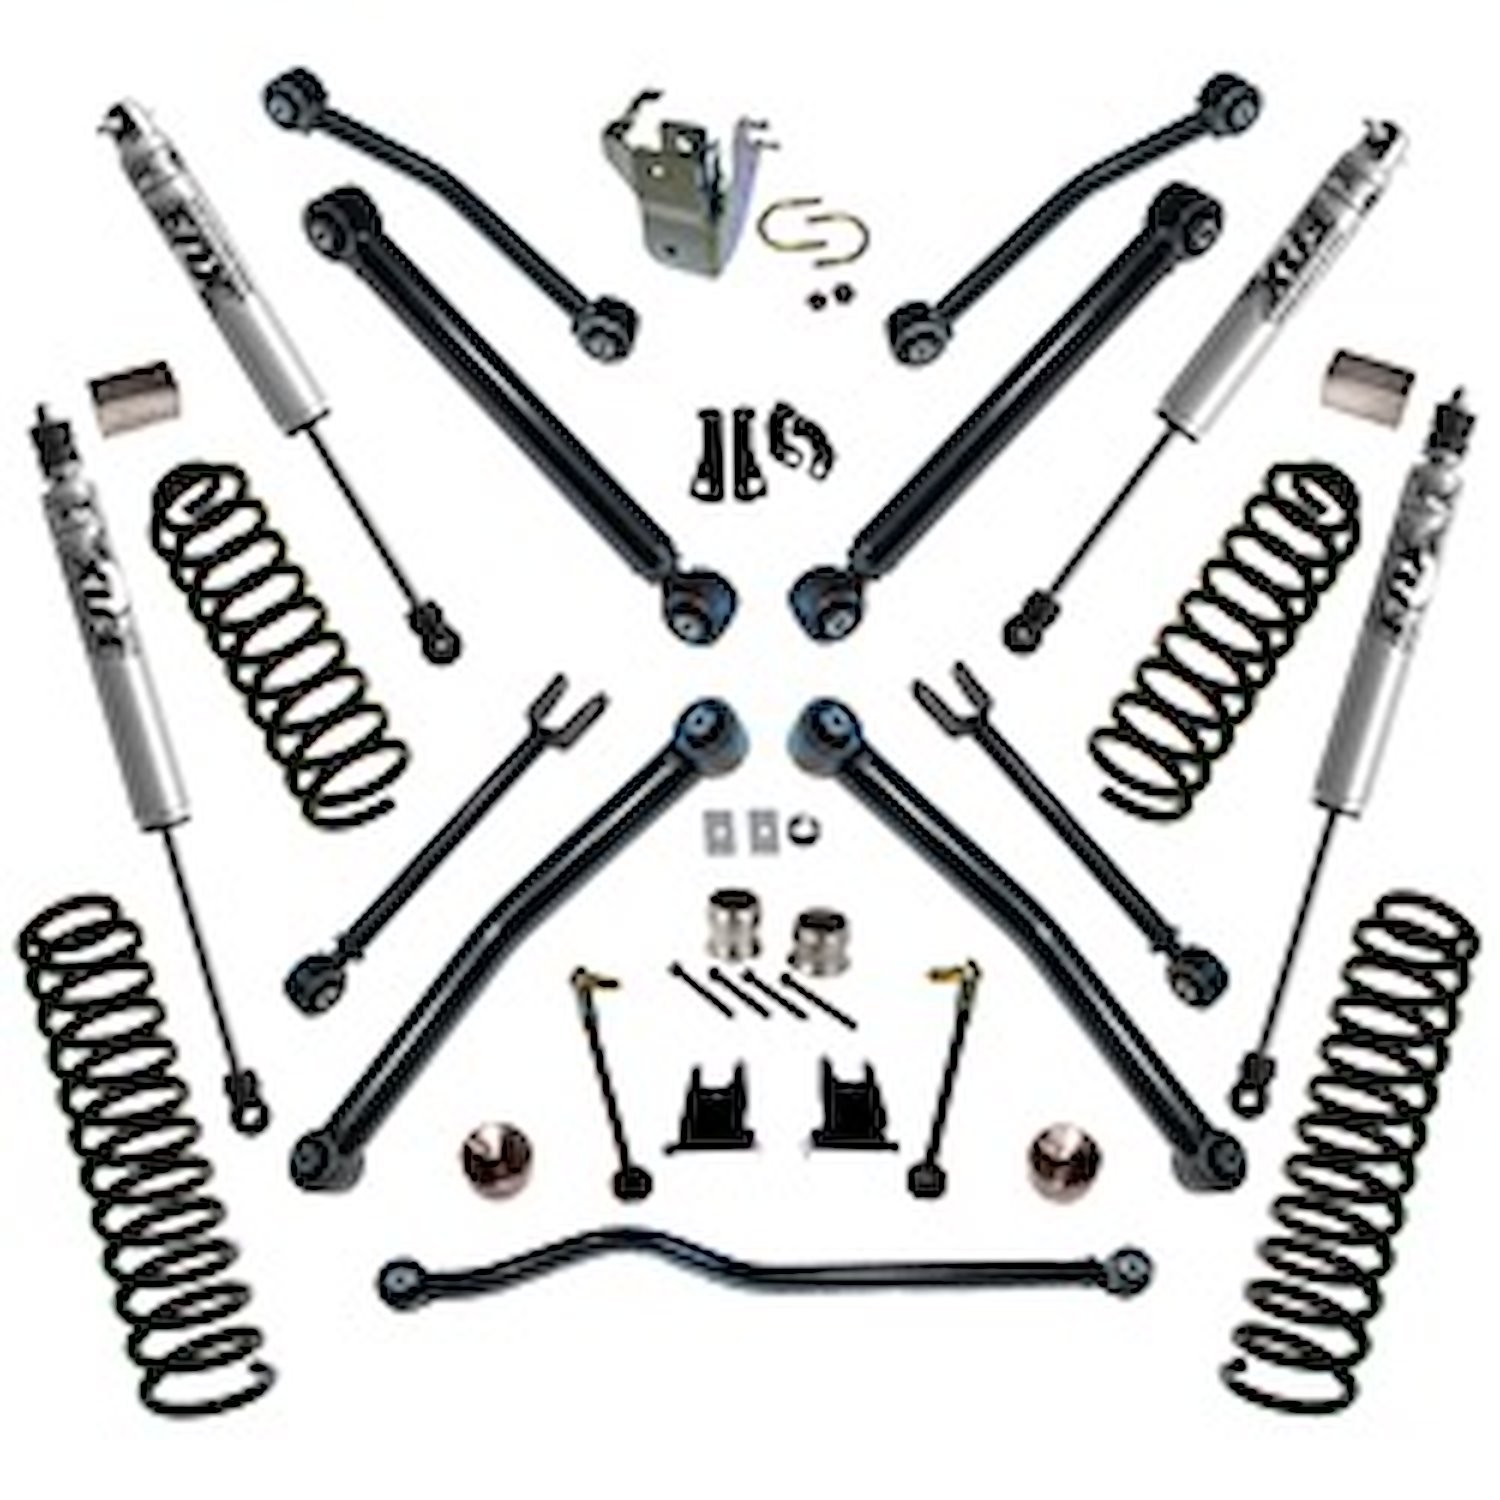 K996F Front and Rear Suspension Lift Kit, Lift Amount: 4 in. Front/4 in. Rear